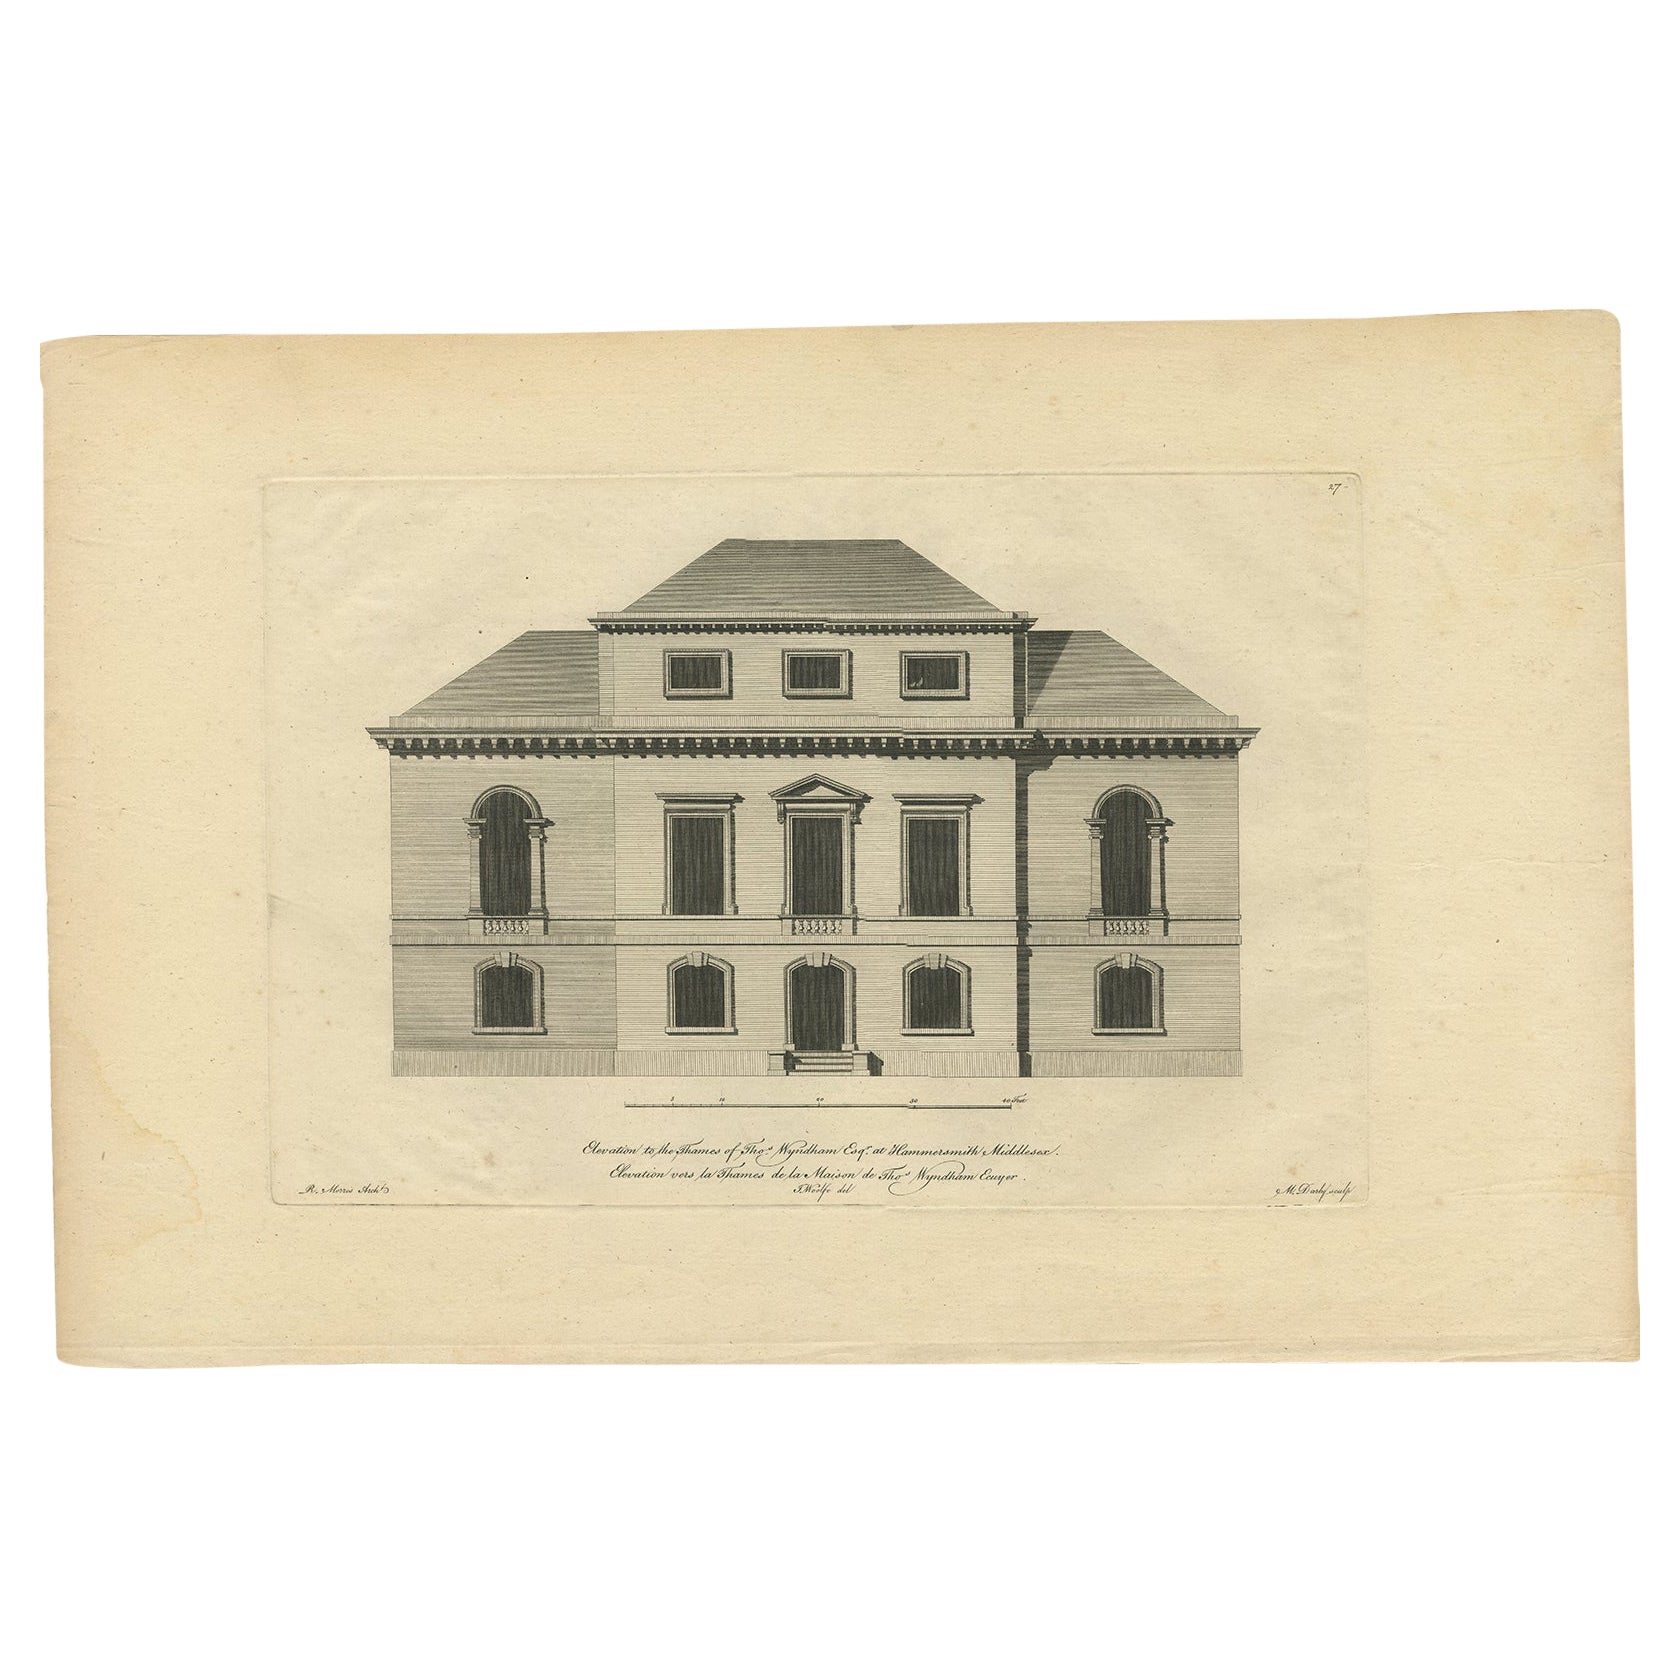 Antique Print of Thomas Wyndham's Palace by Woolfe, c.1770